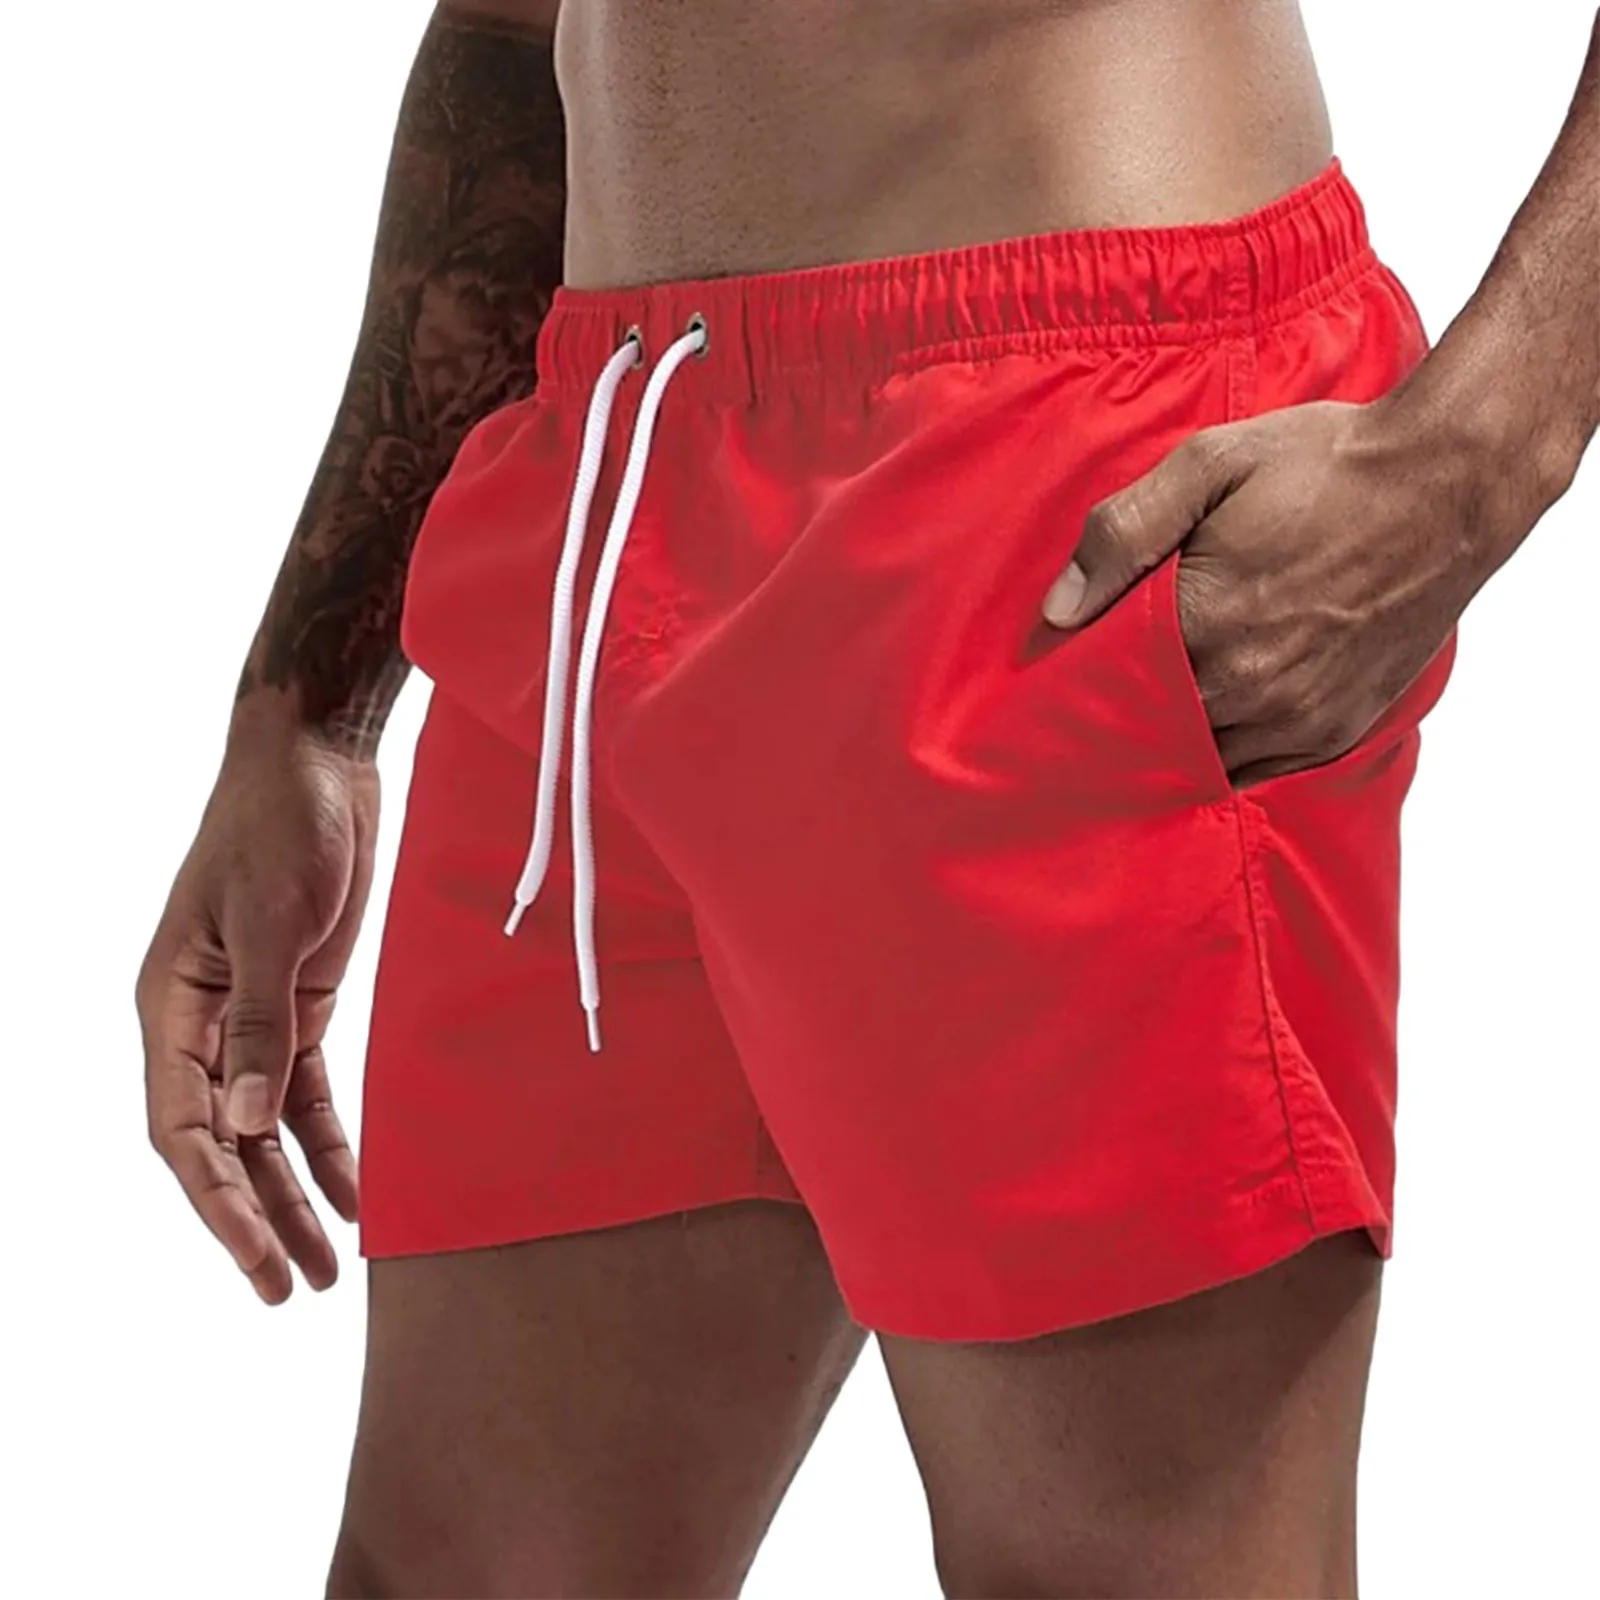 Quick Dry Red Board Shorts Mens Running Surfing Swimming Shorts With Pocket Drawstring Swimwear Swim Shorts Trunks In Stock